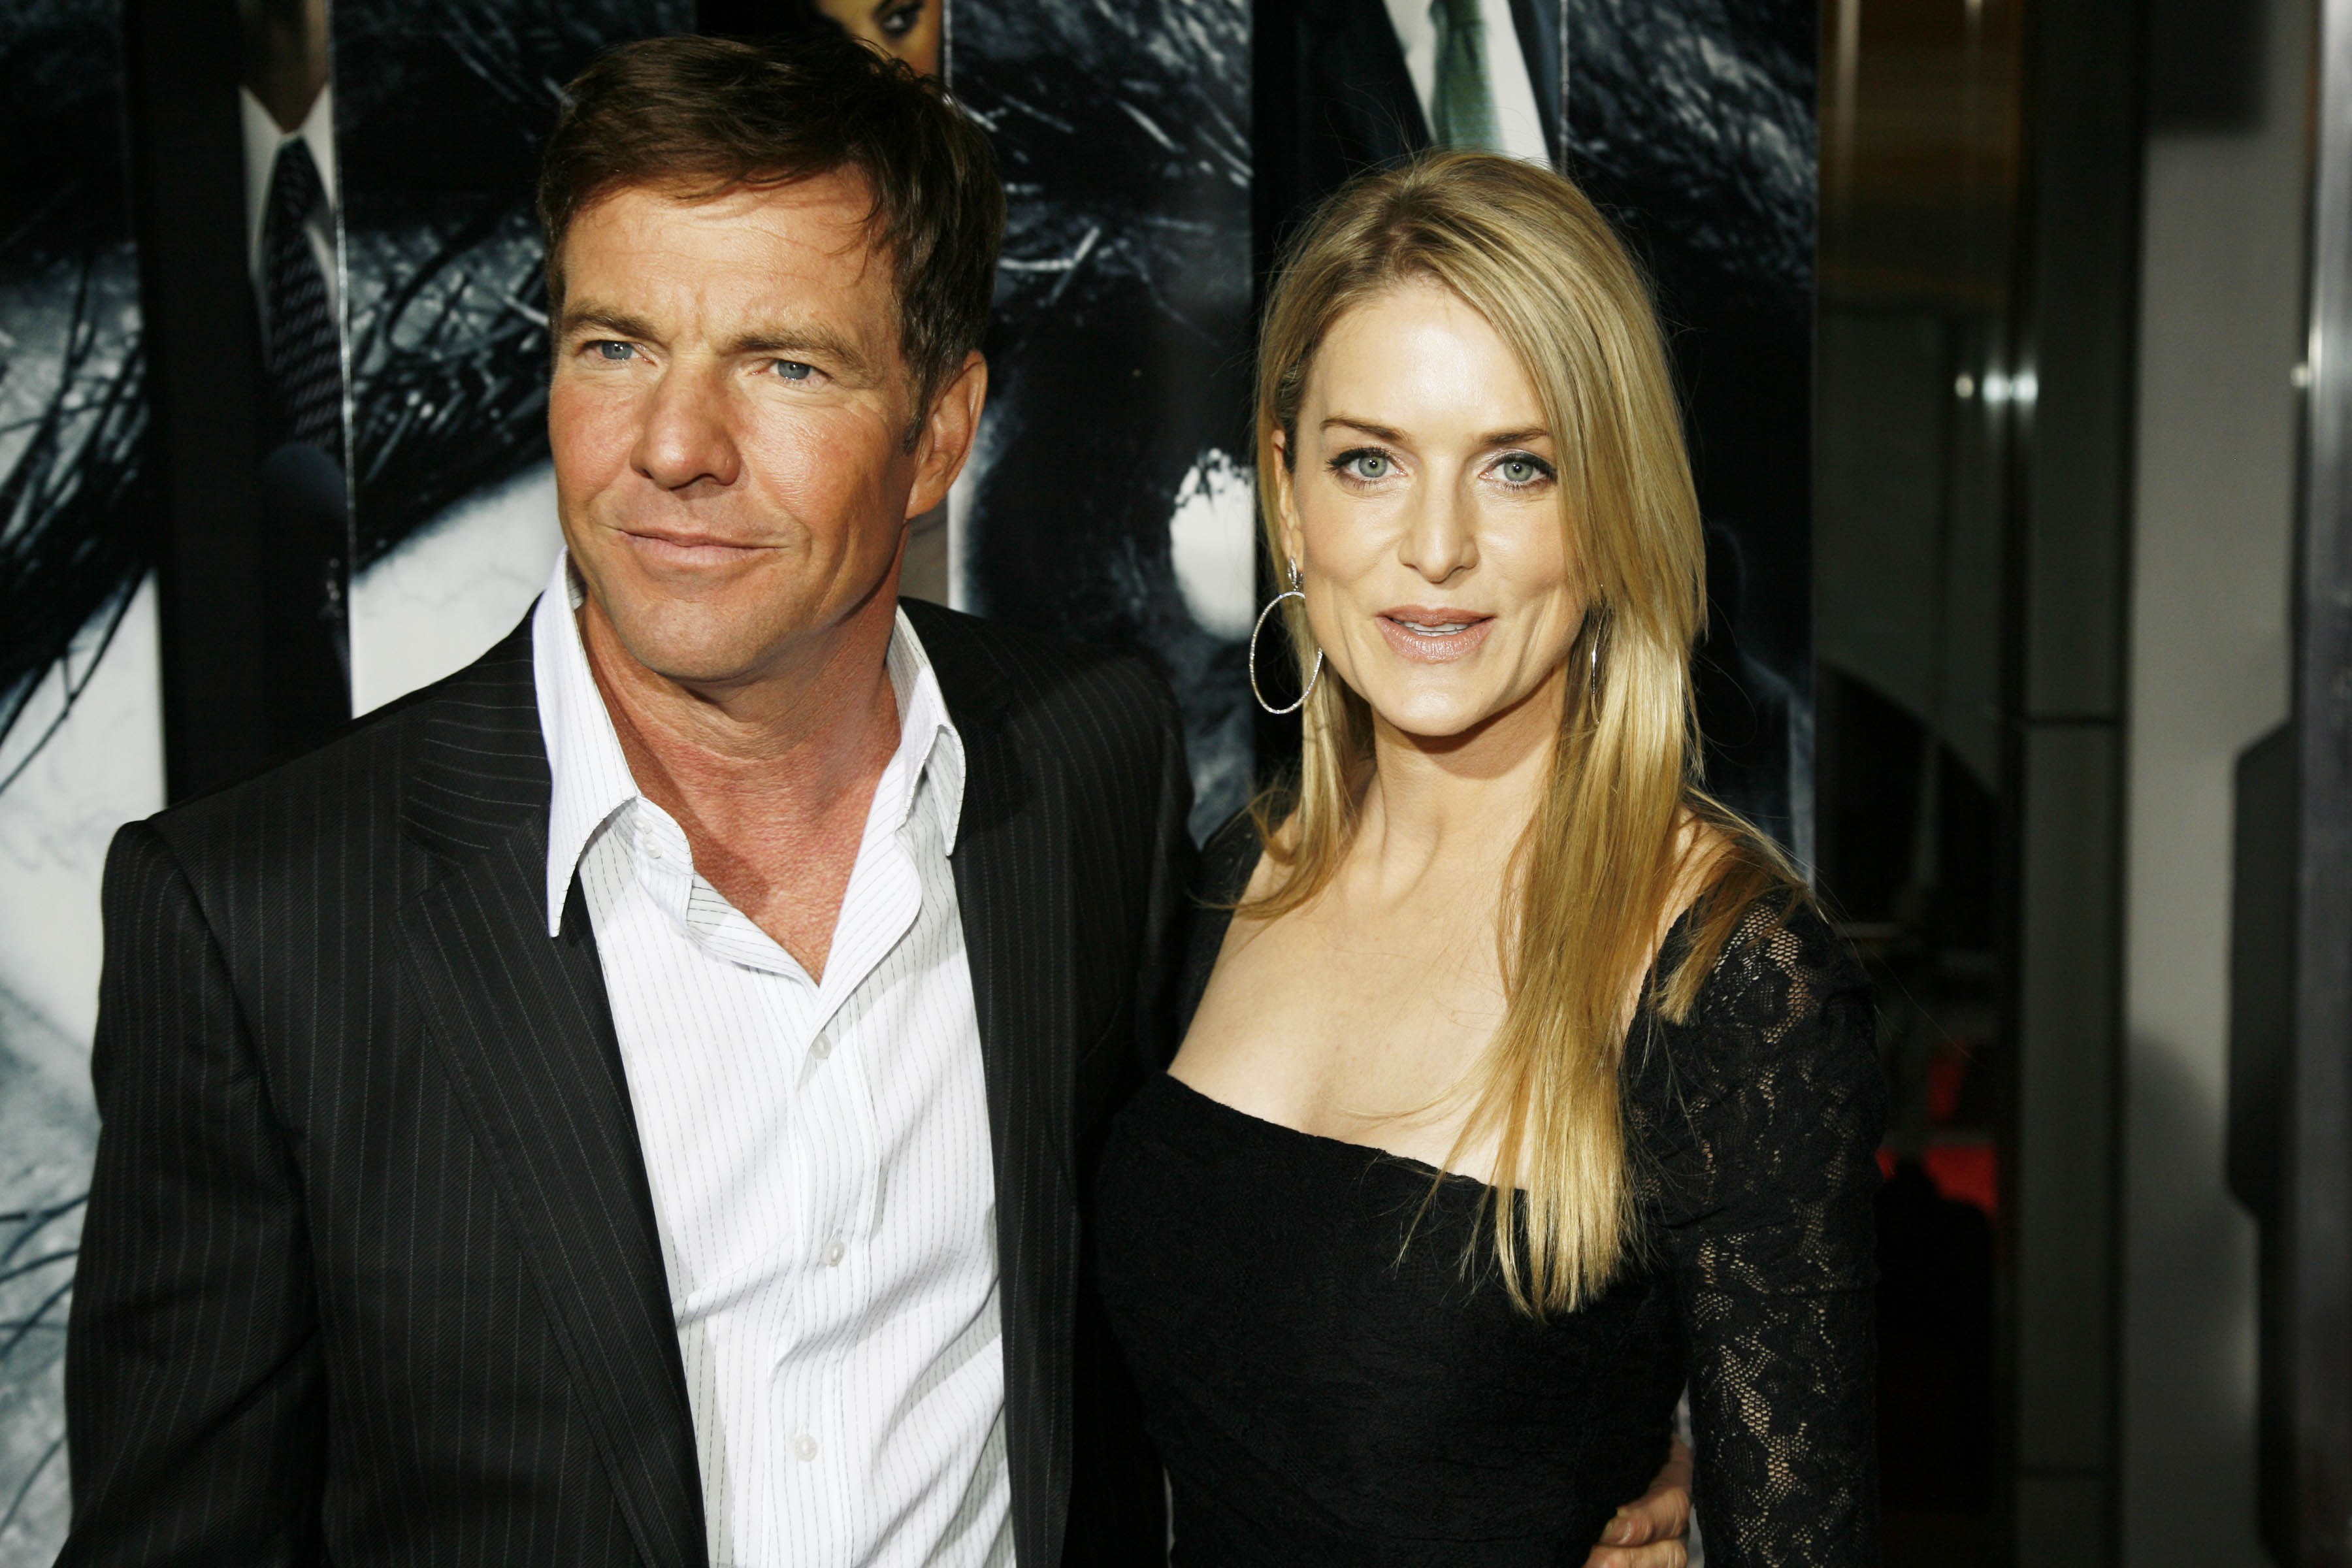 Dennis Quaid and Kimberly Buffington on February 20, 2008 in New York City | Source: Getty Images